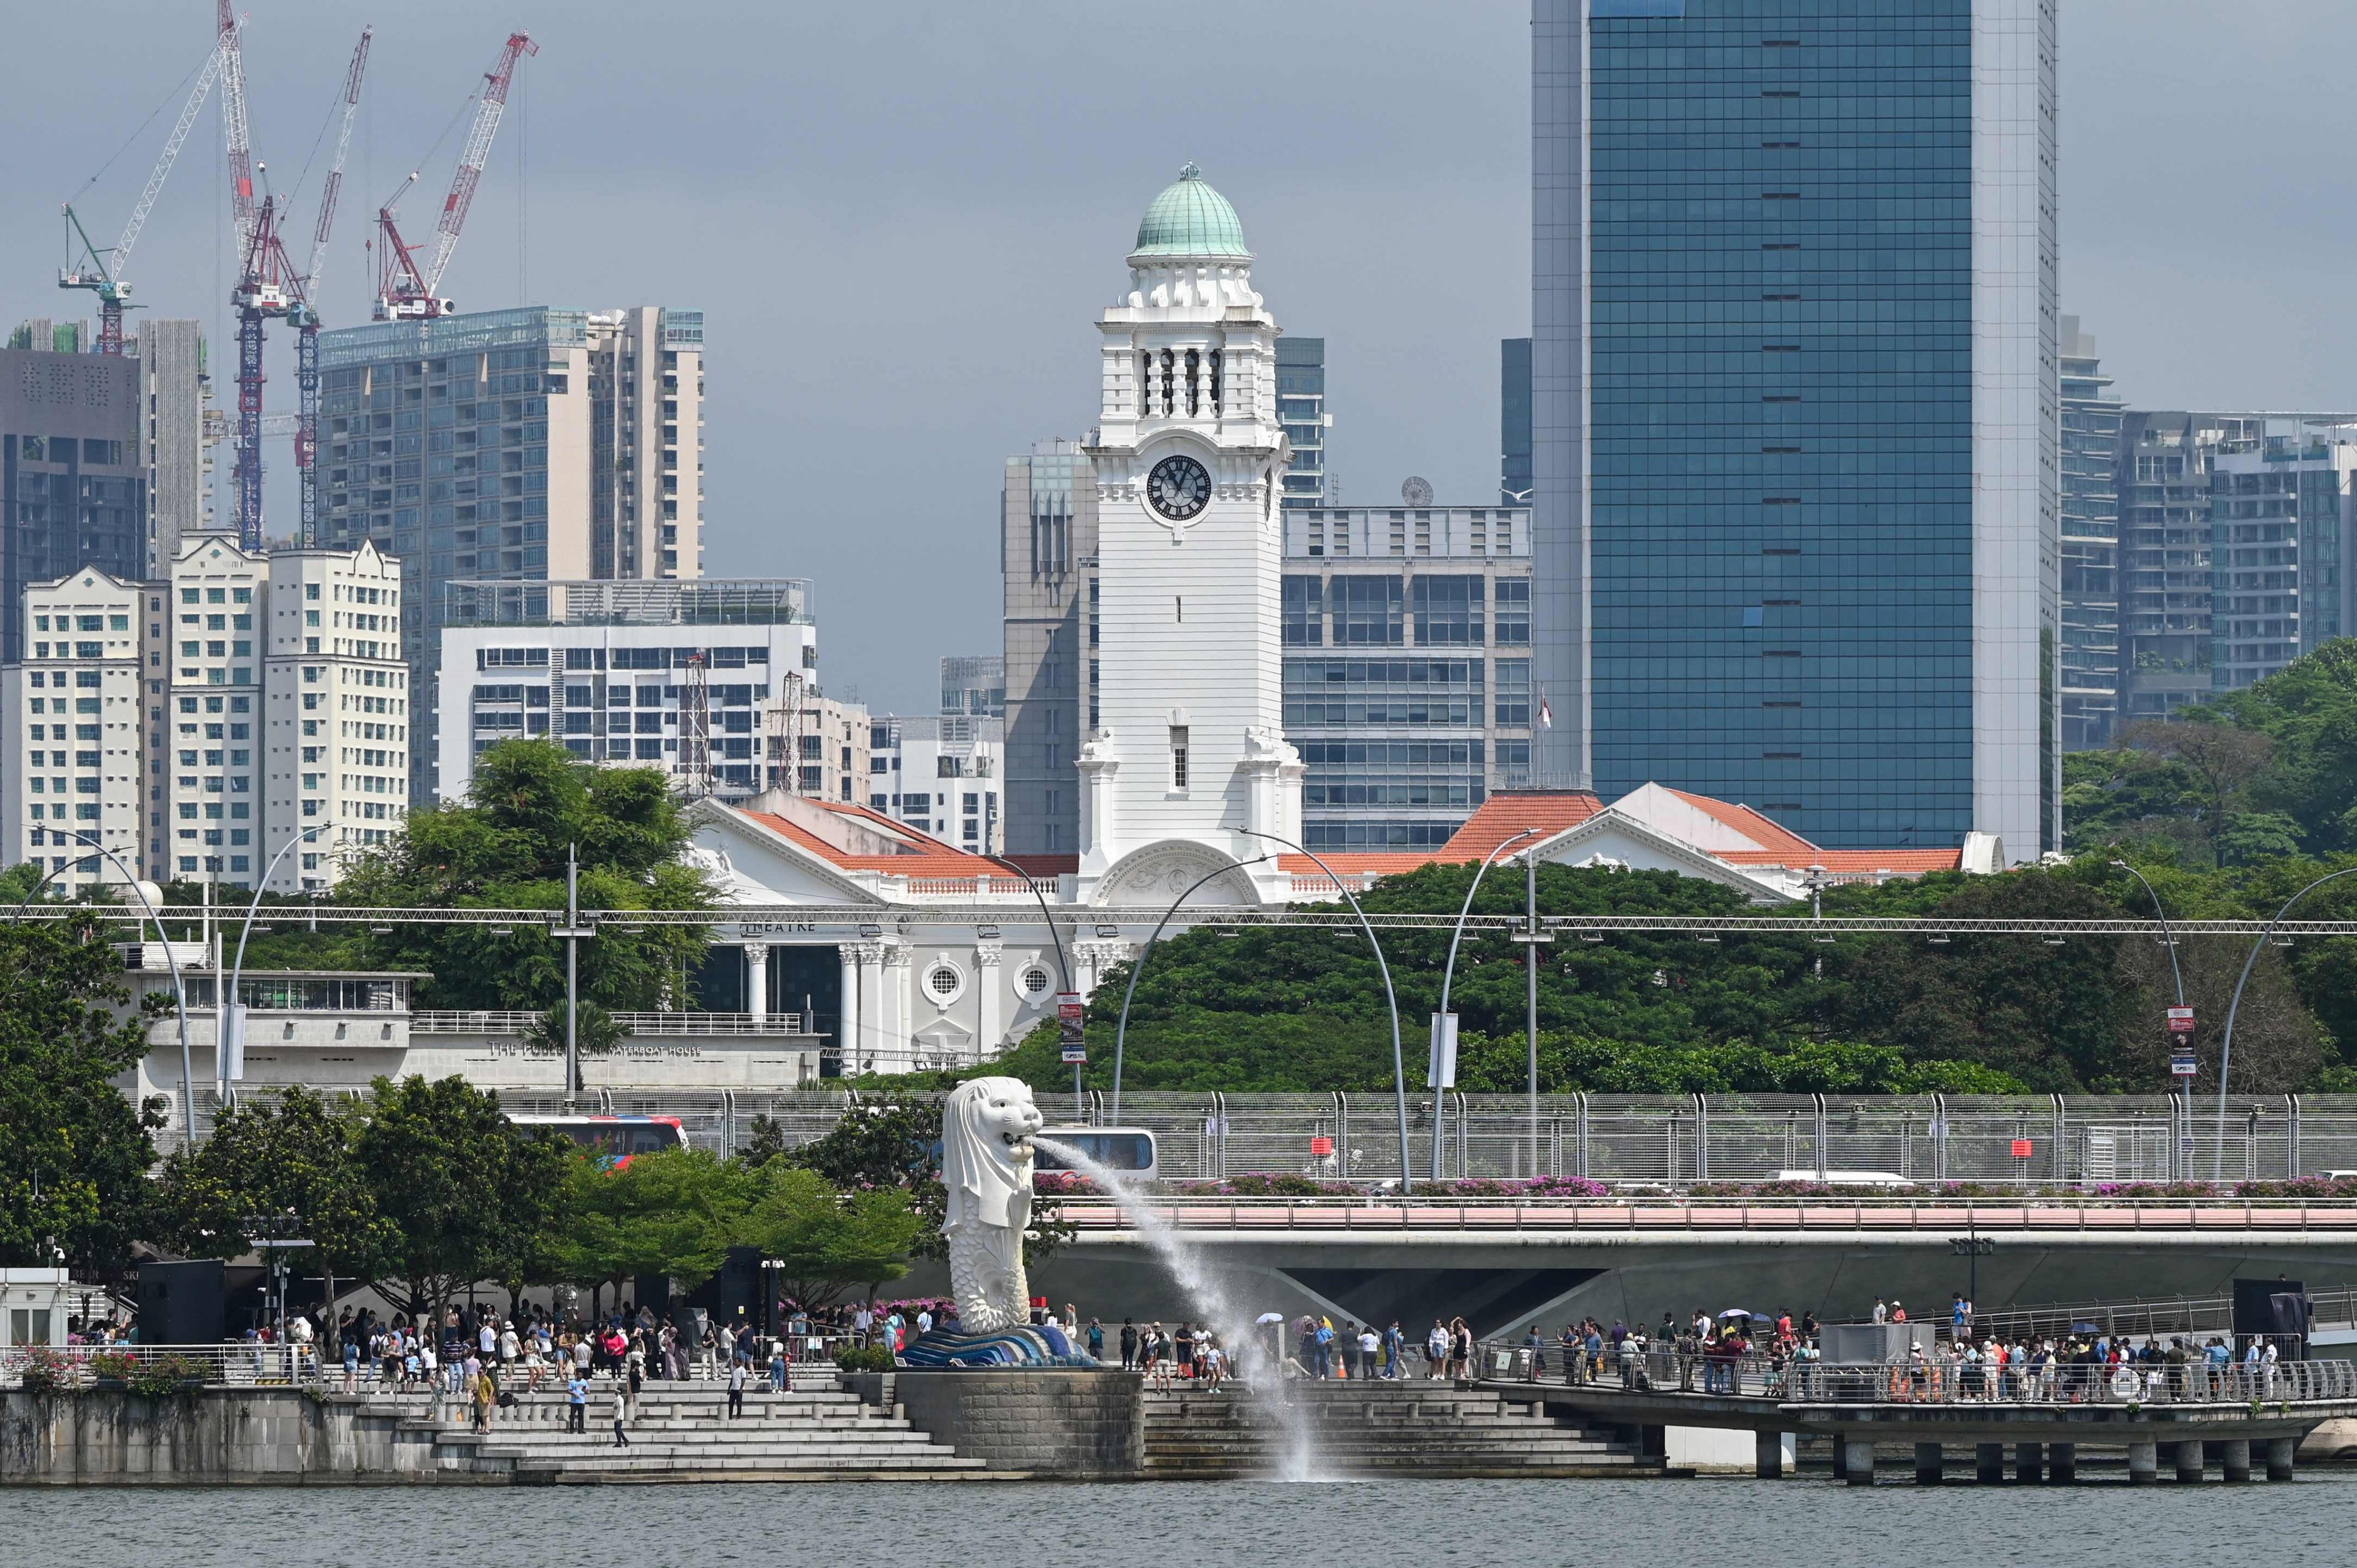 People gather around the Merlion statue at Marina Bay in Singapore. The city state’s High Court on Tuesday sentenced Singaporean Tan Jeck Tuang to 15 years’ imprisonment for raping a domestic worker and outraging her modesty. Photo: AFP